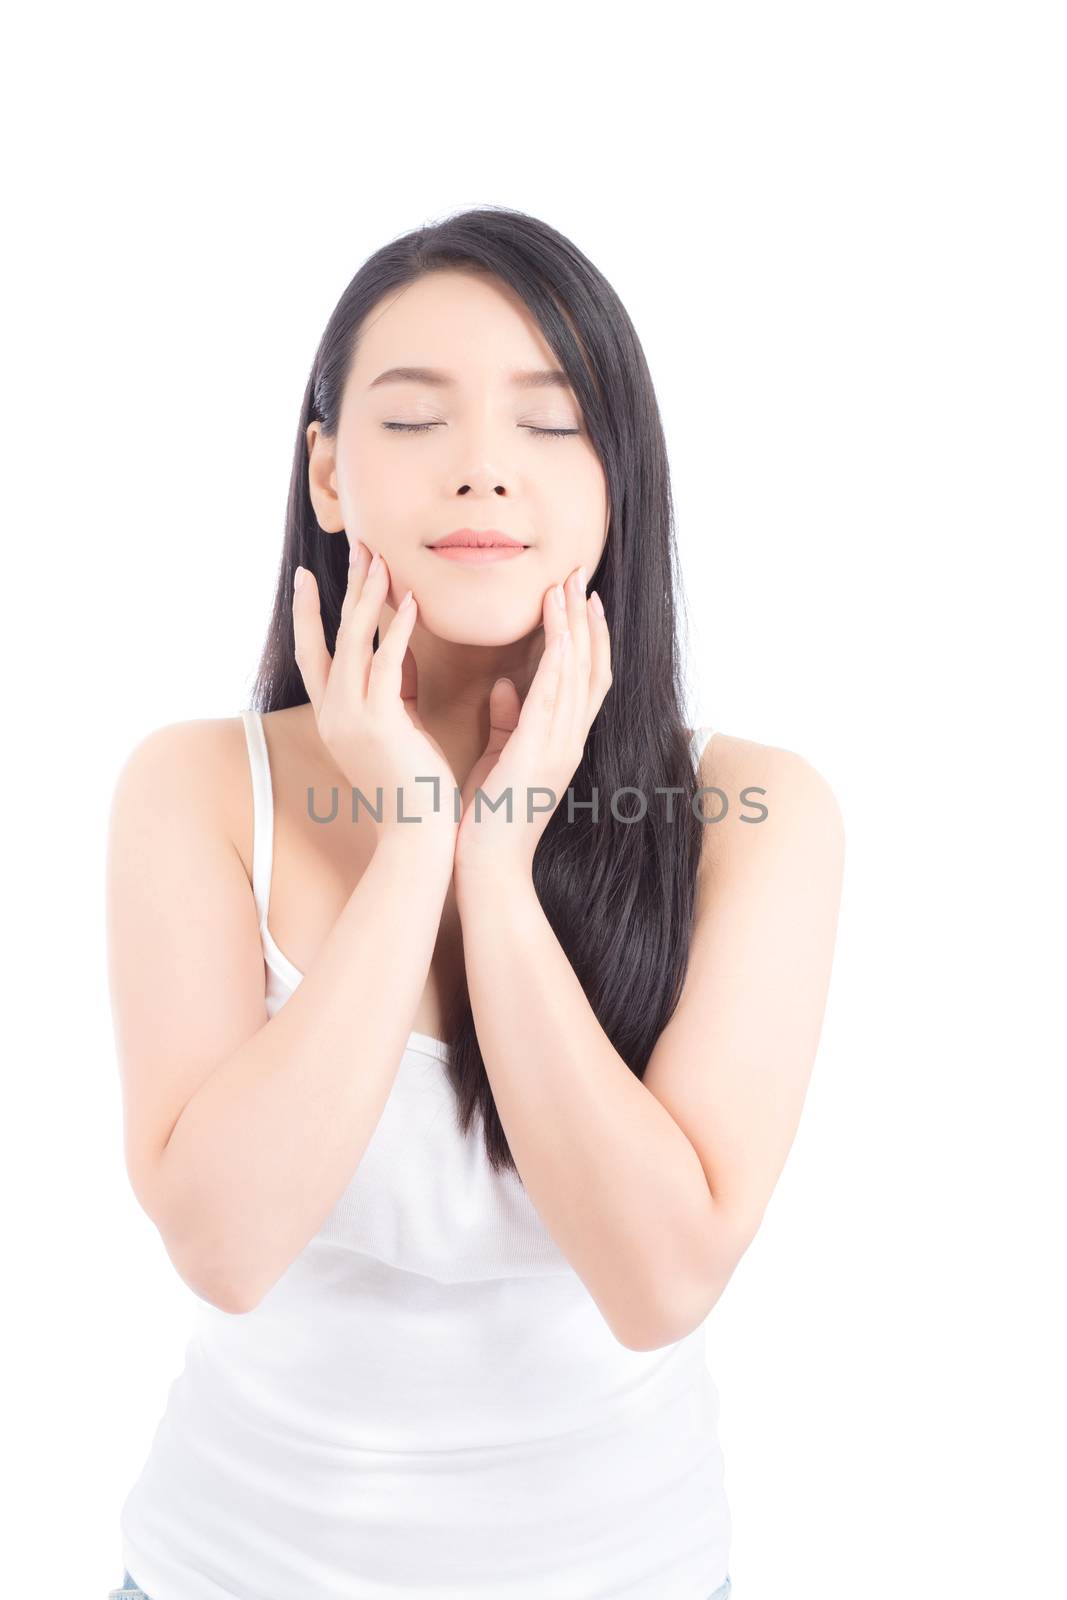 Portrait of beautiful woman asian makeup of cosmetic, girl hand touch cheek and smile attractive, face of beauty perfect with wellness isolated on white background with skin healthcare concept.